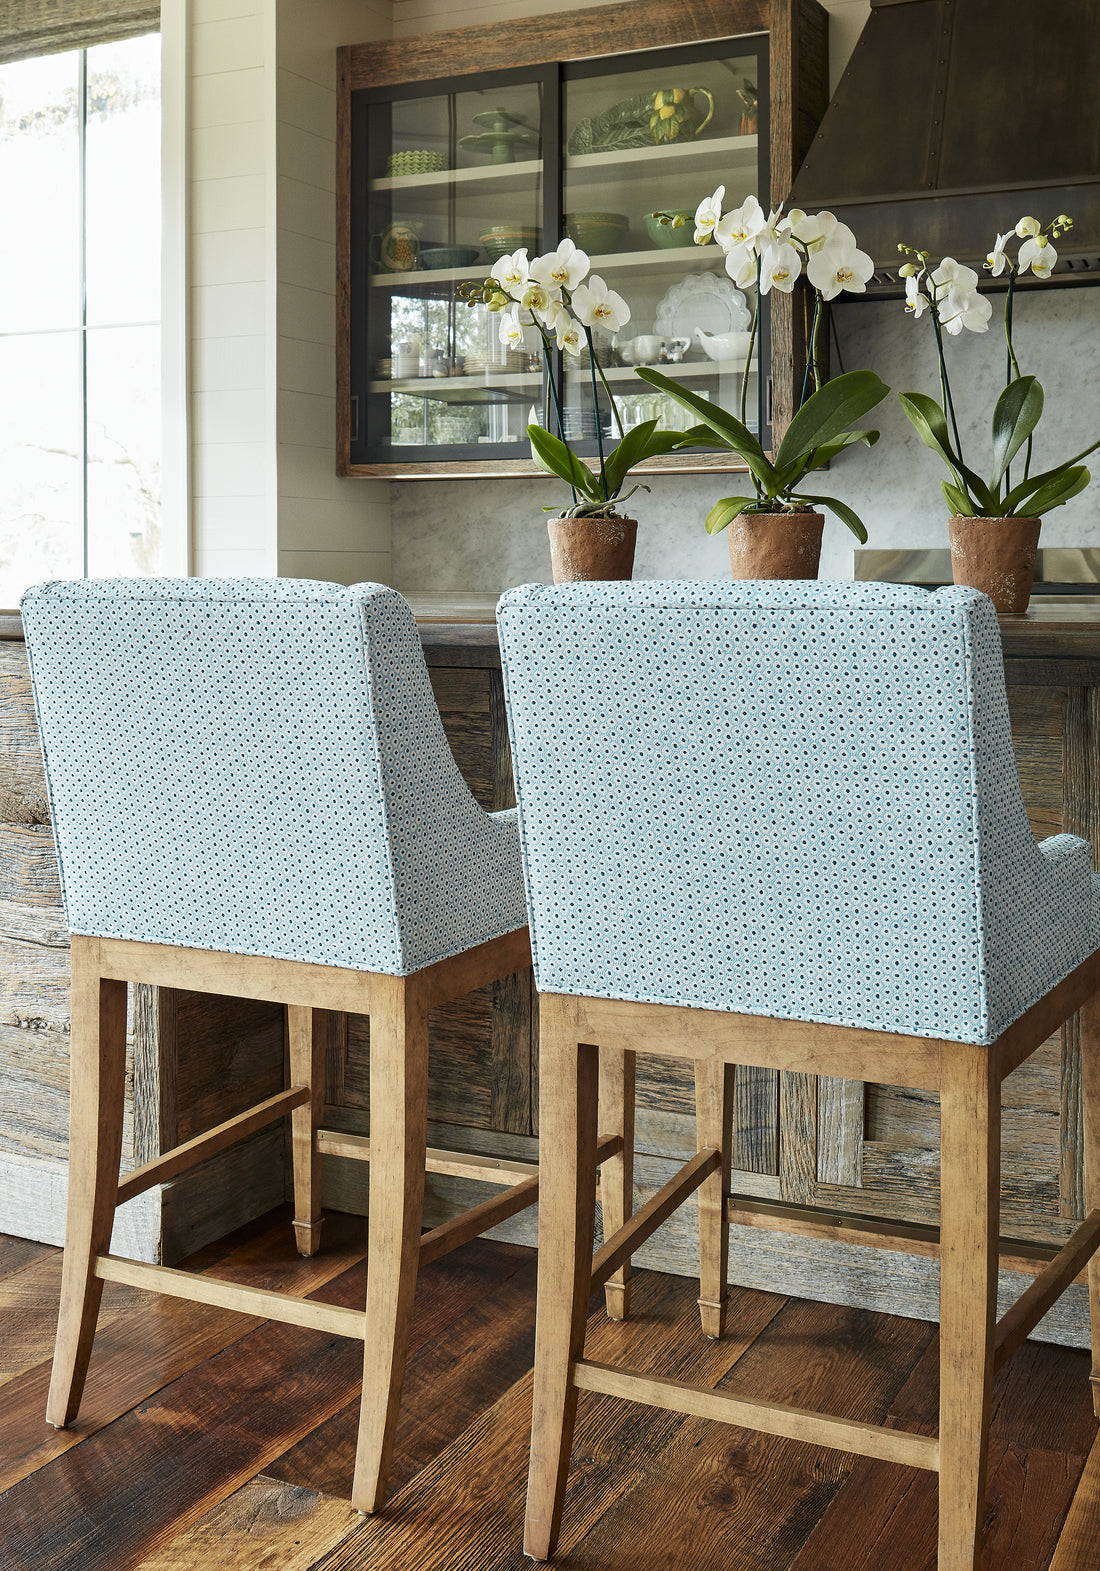 Hudson Counter Stool in Pixie woven fabric in sky and marine color - pattern number W73463 by Thibaut in the Landmark collection